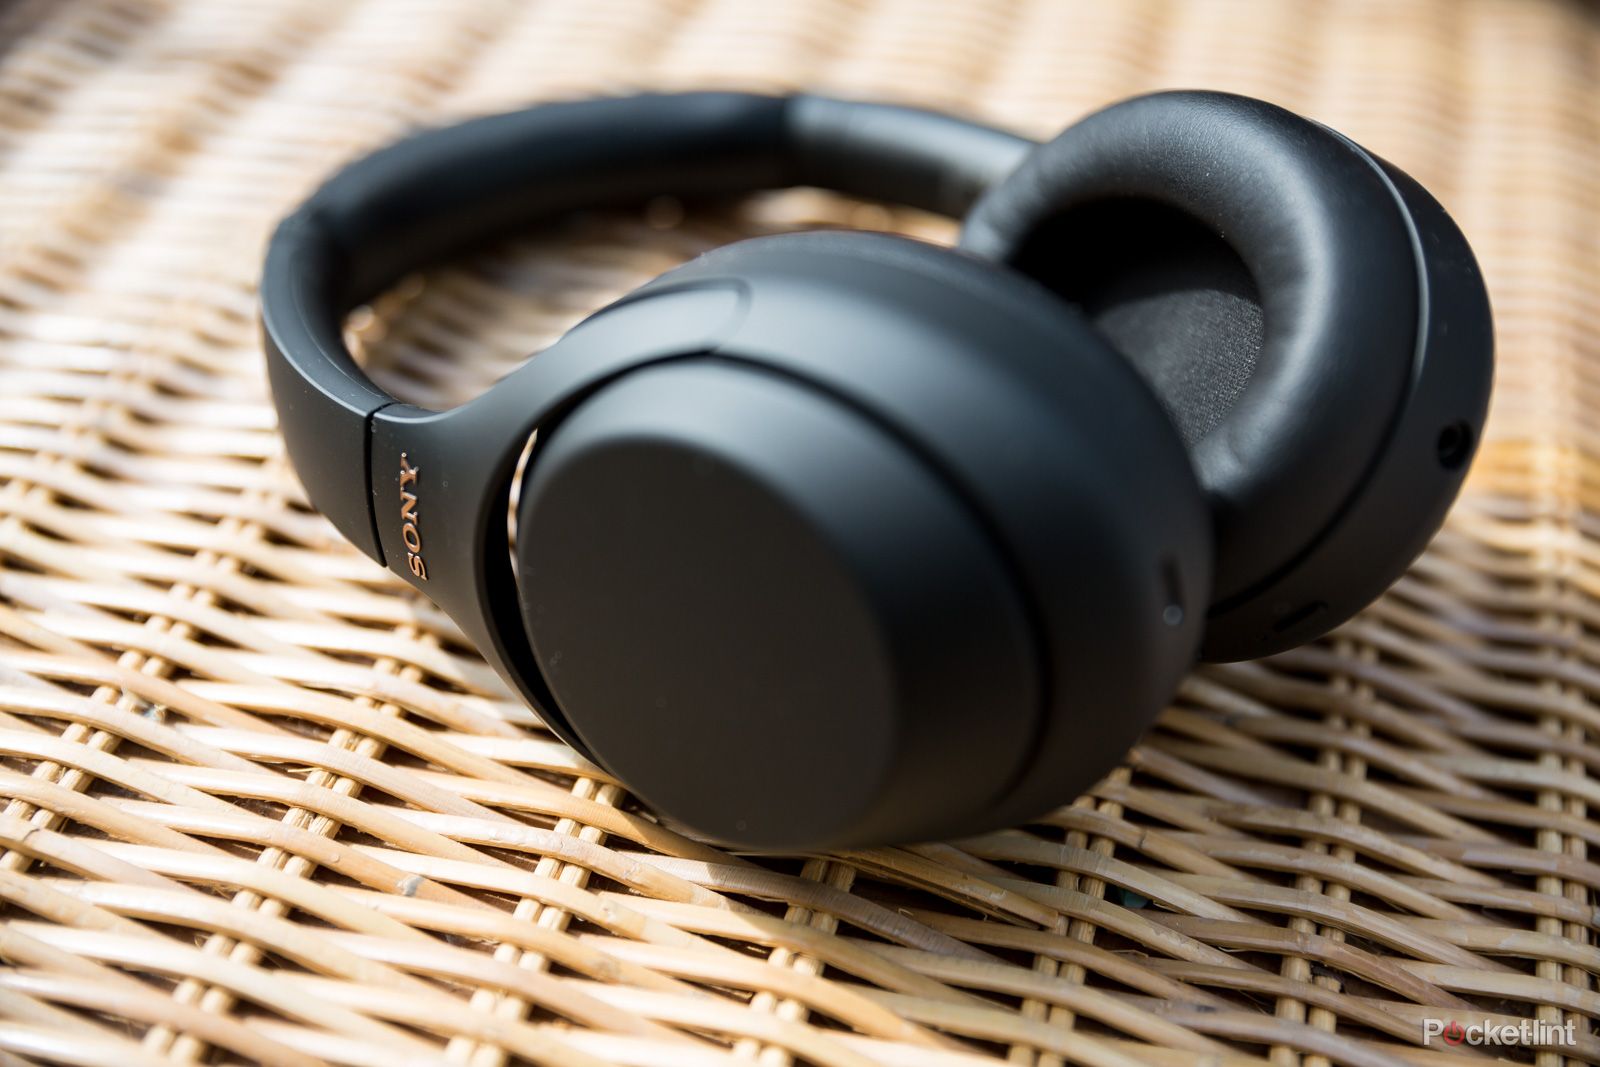 Sony WH-1000XM4 review: The wireless ANC headphones to beat?